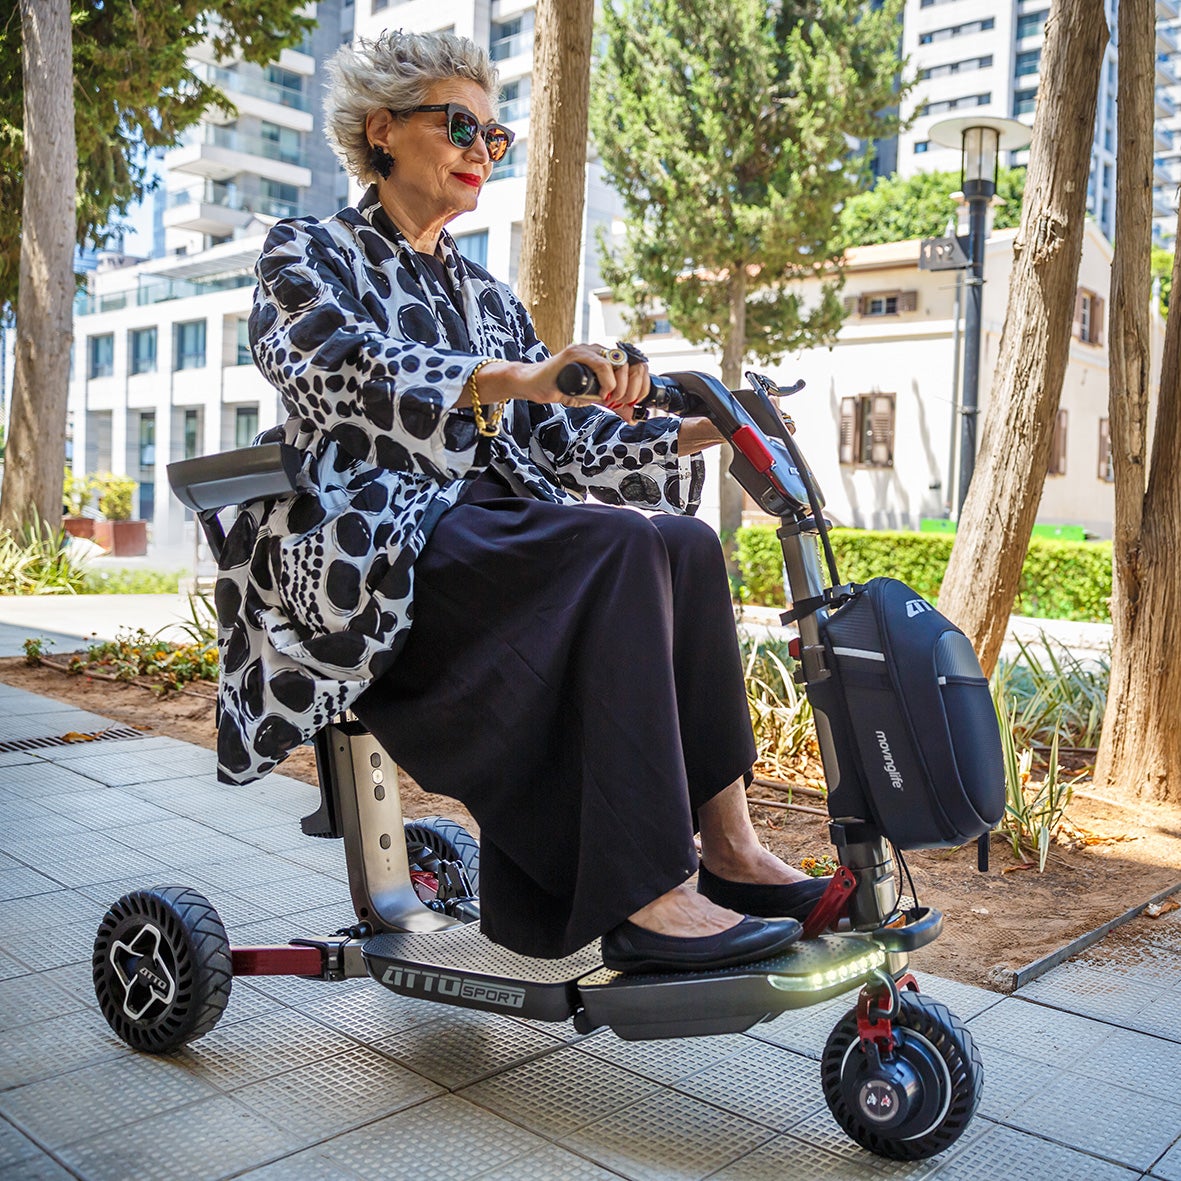 Atto Folding Mobility Scooter